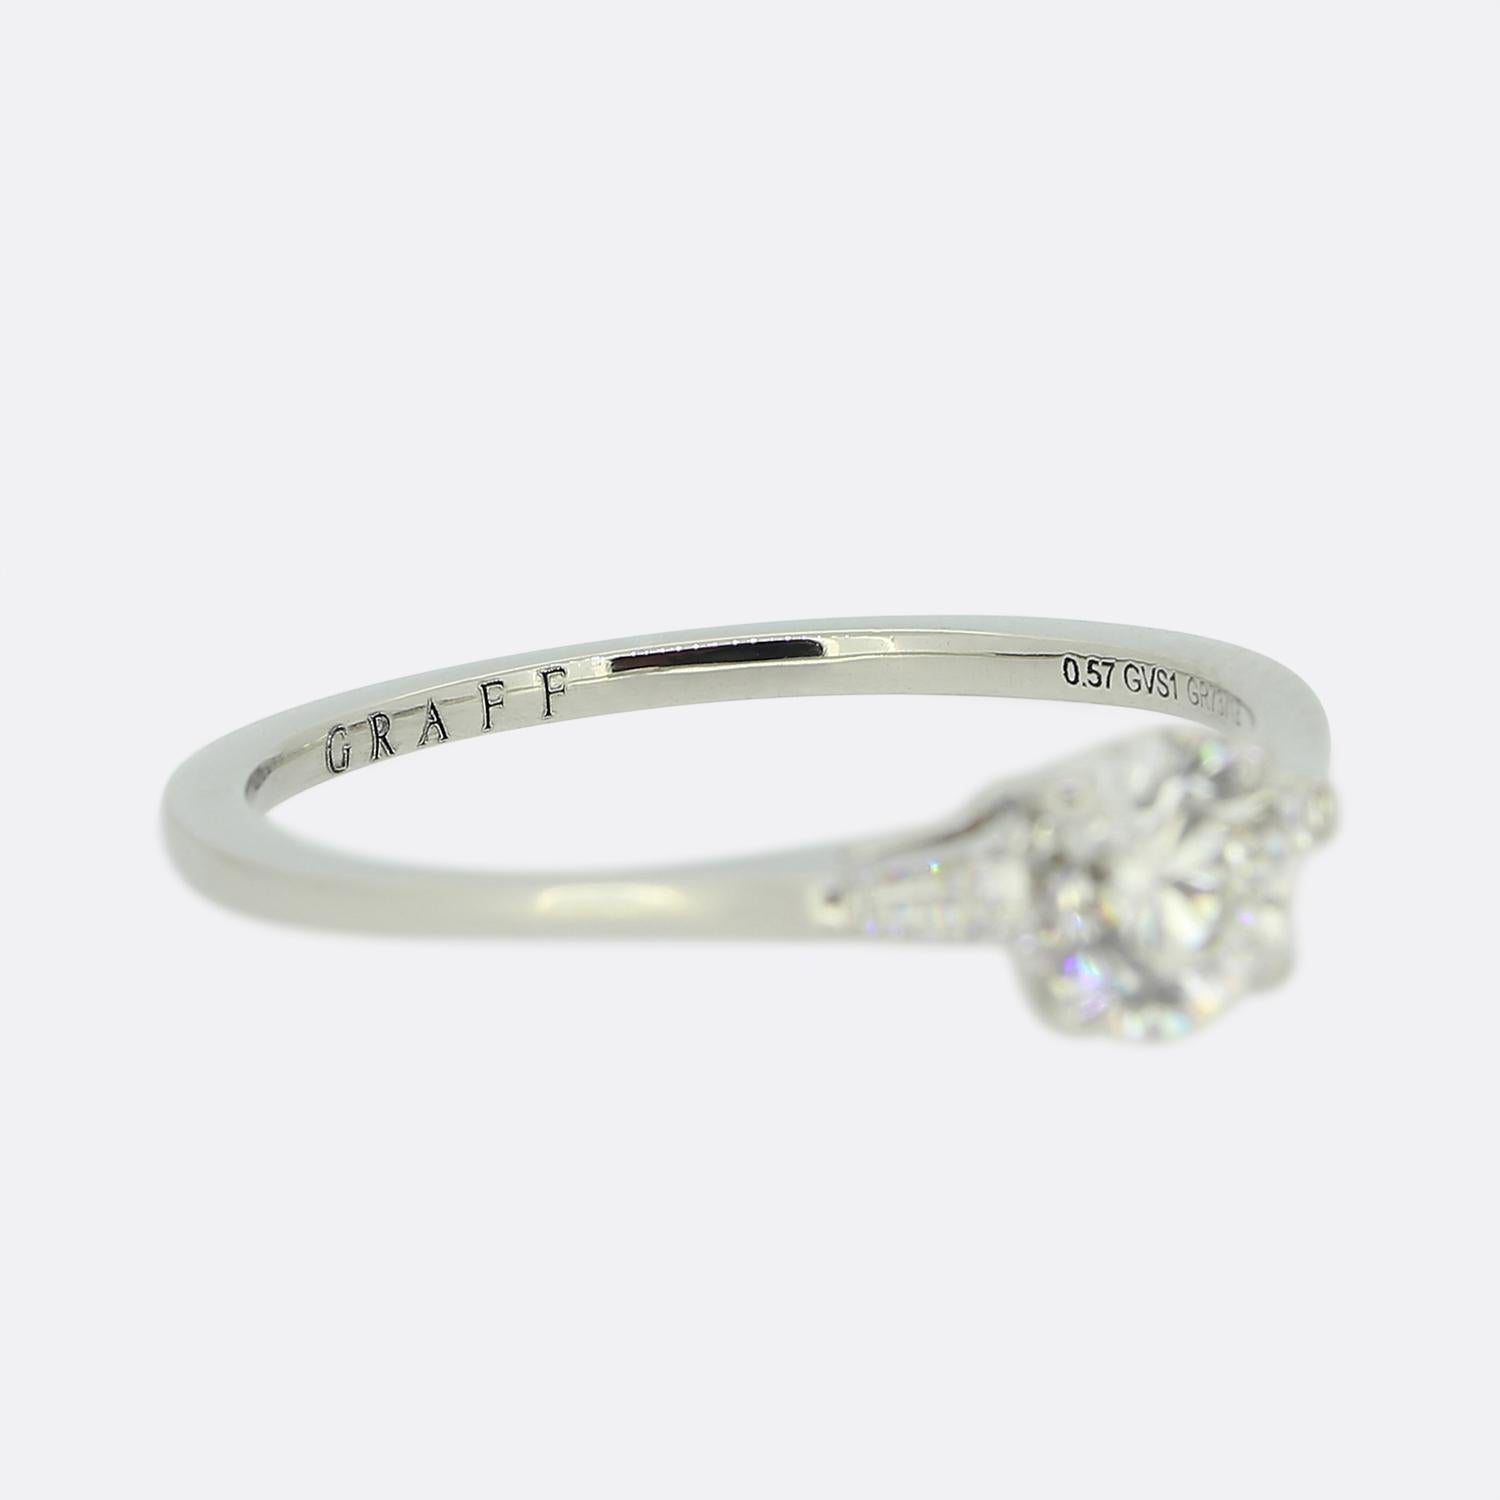 Graff 0.57 Carat Diamond Promise Ring In Good Condition For Sale In London, GB